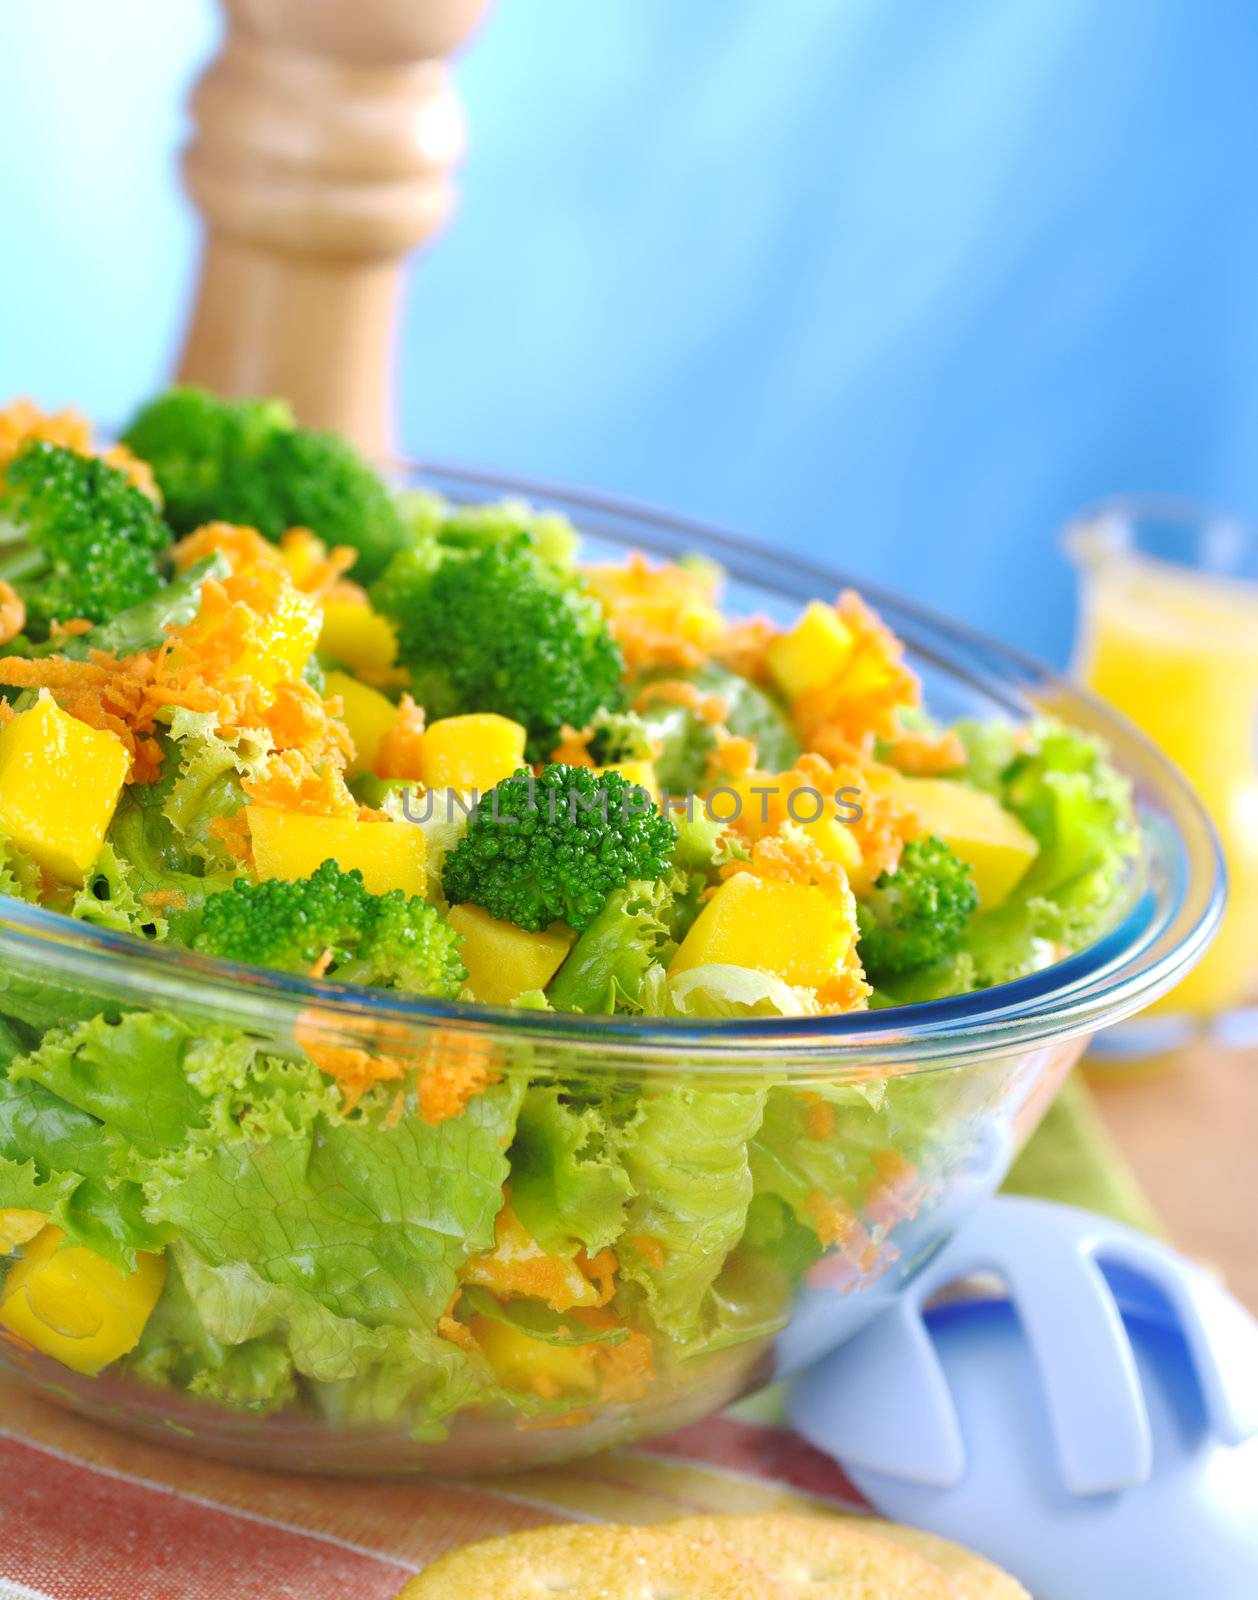 Broccoli-mango-carrot-lettuce salad in a glass bowl with salad servers laying next to it and a pepper mill and orange juice dressing in the background (Selective Focus, Focus on the front)